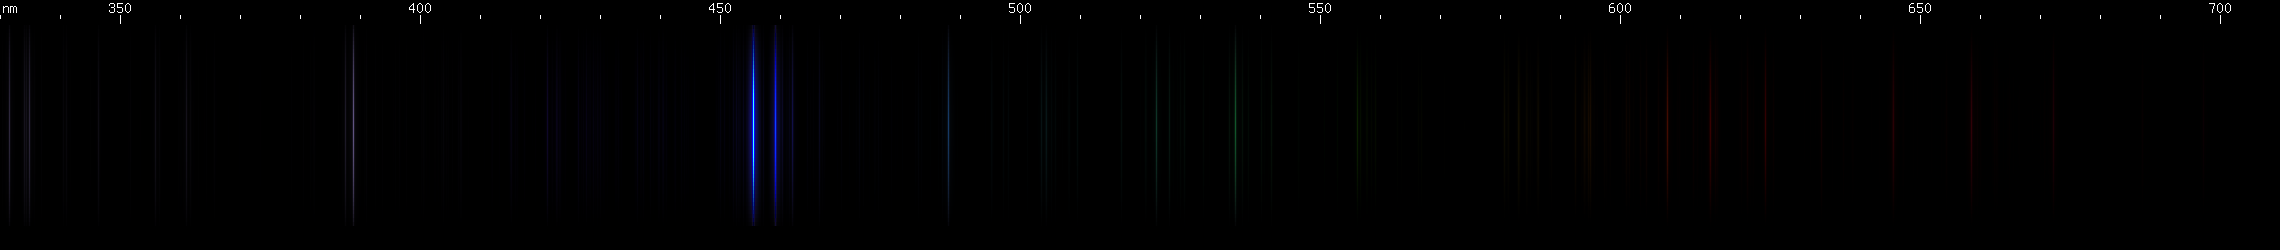 Spectral lines of Cesium.